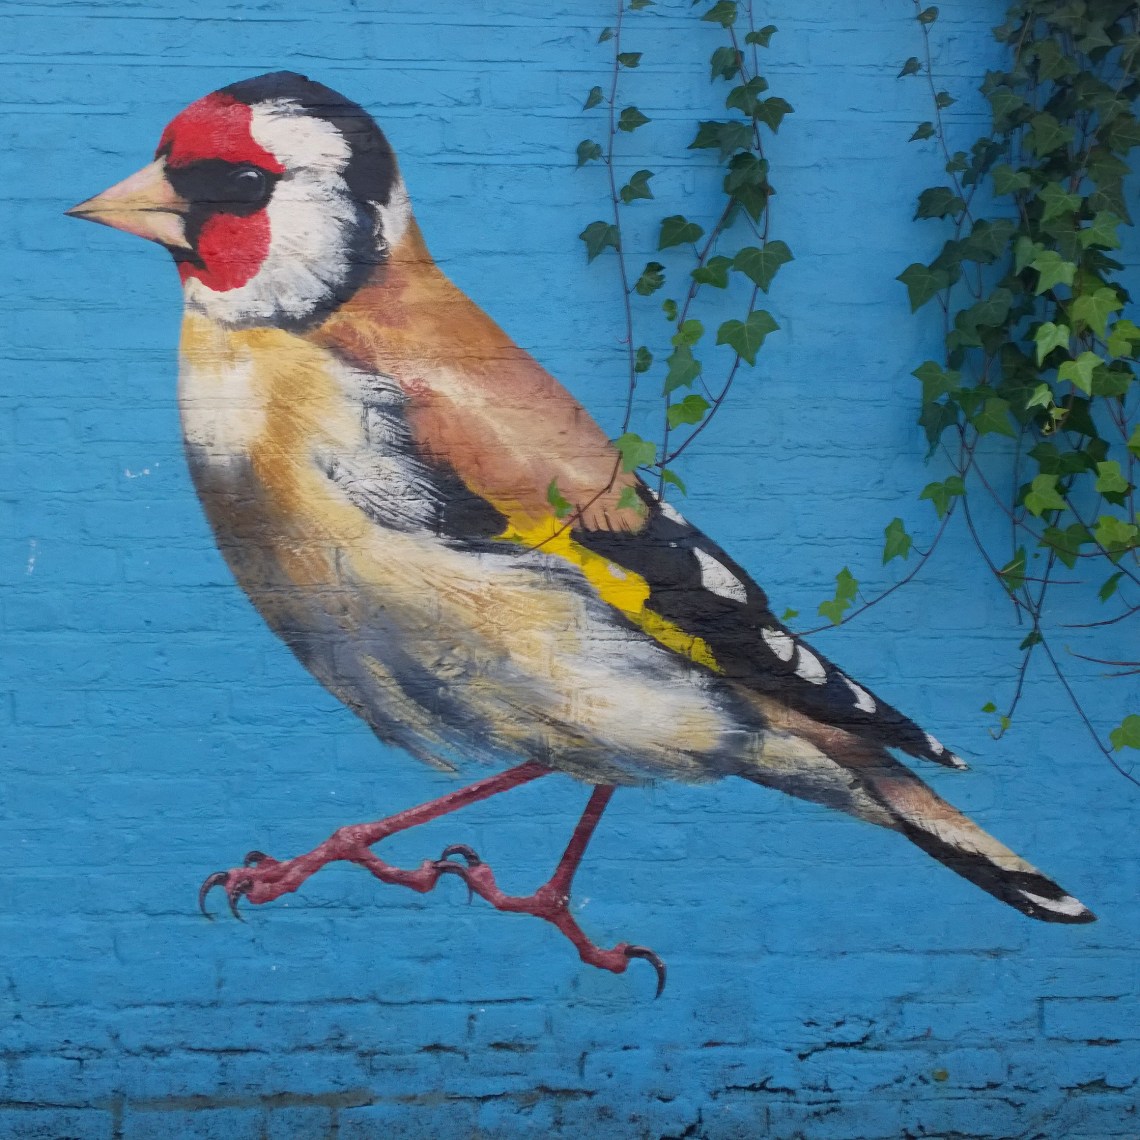 Number 6 comes from our good friend  @AtmStreetart. His Goldfinch can be found in the grounds of berrymede school in Acton. The  #goldfinch is also by far the most populous visitor to our own feeder here in East London